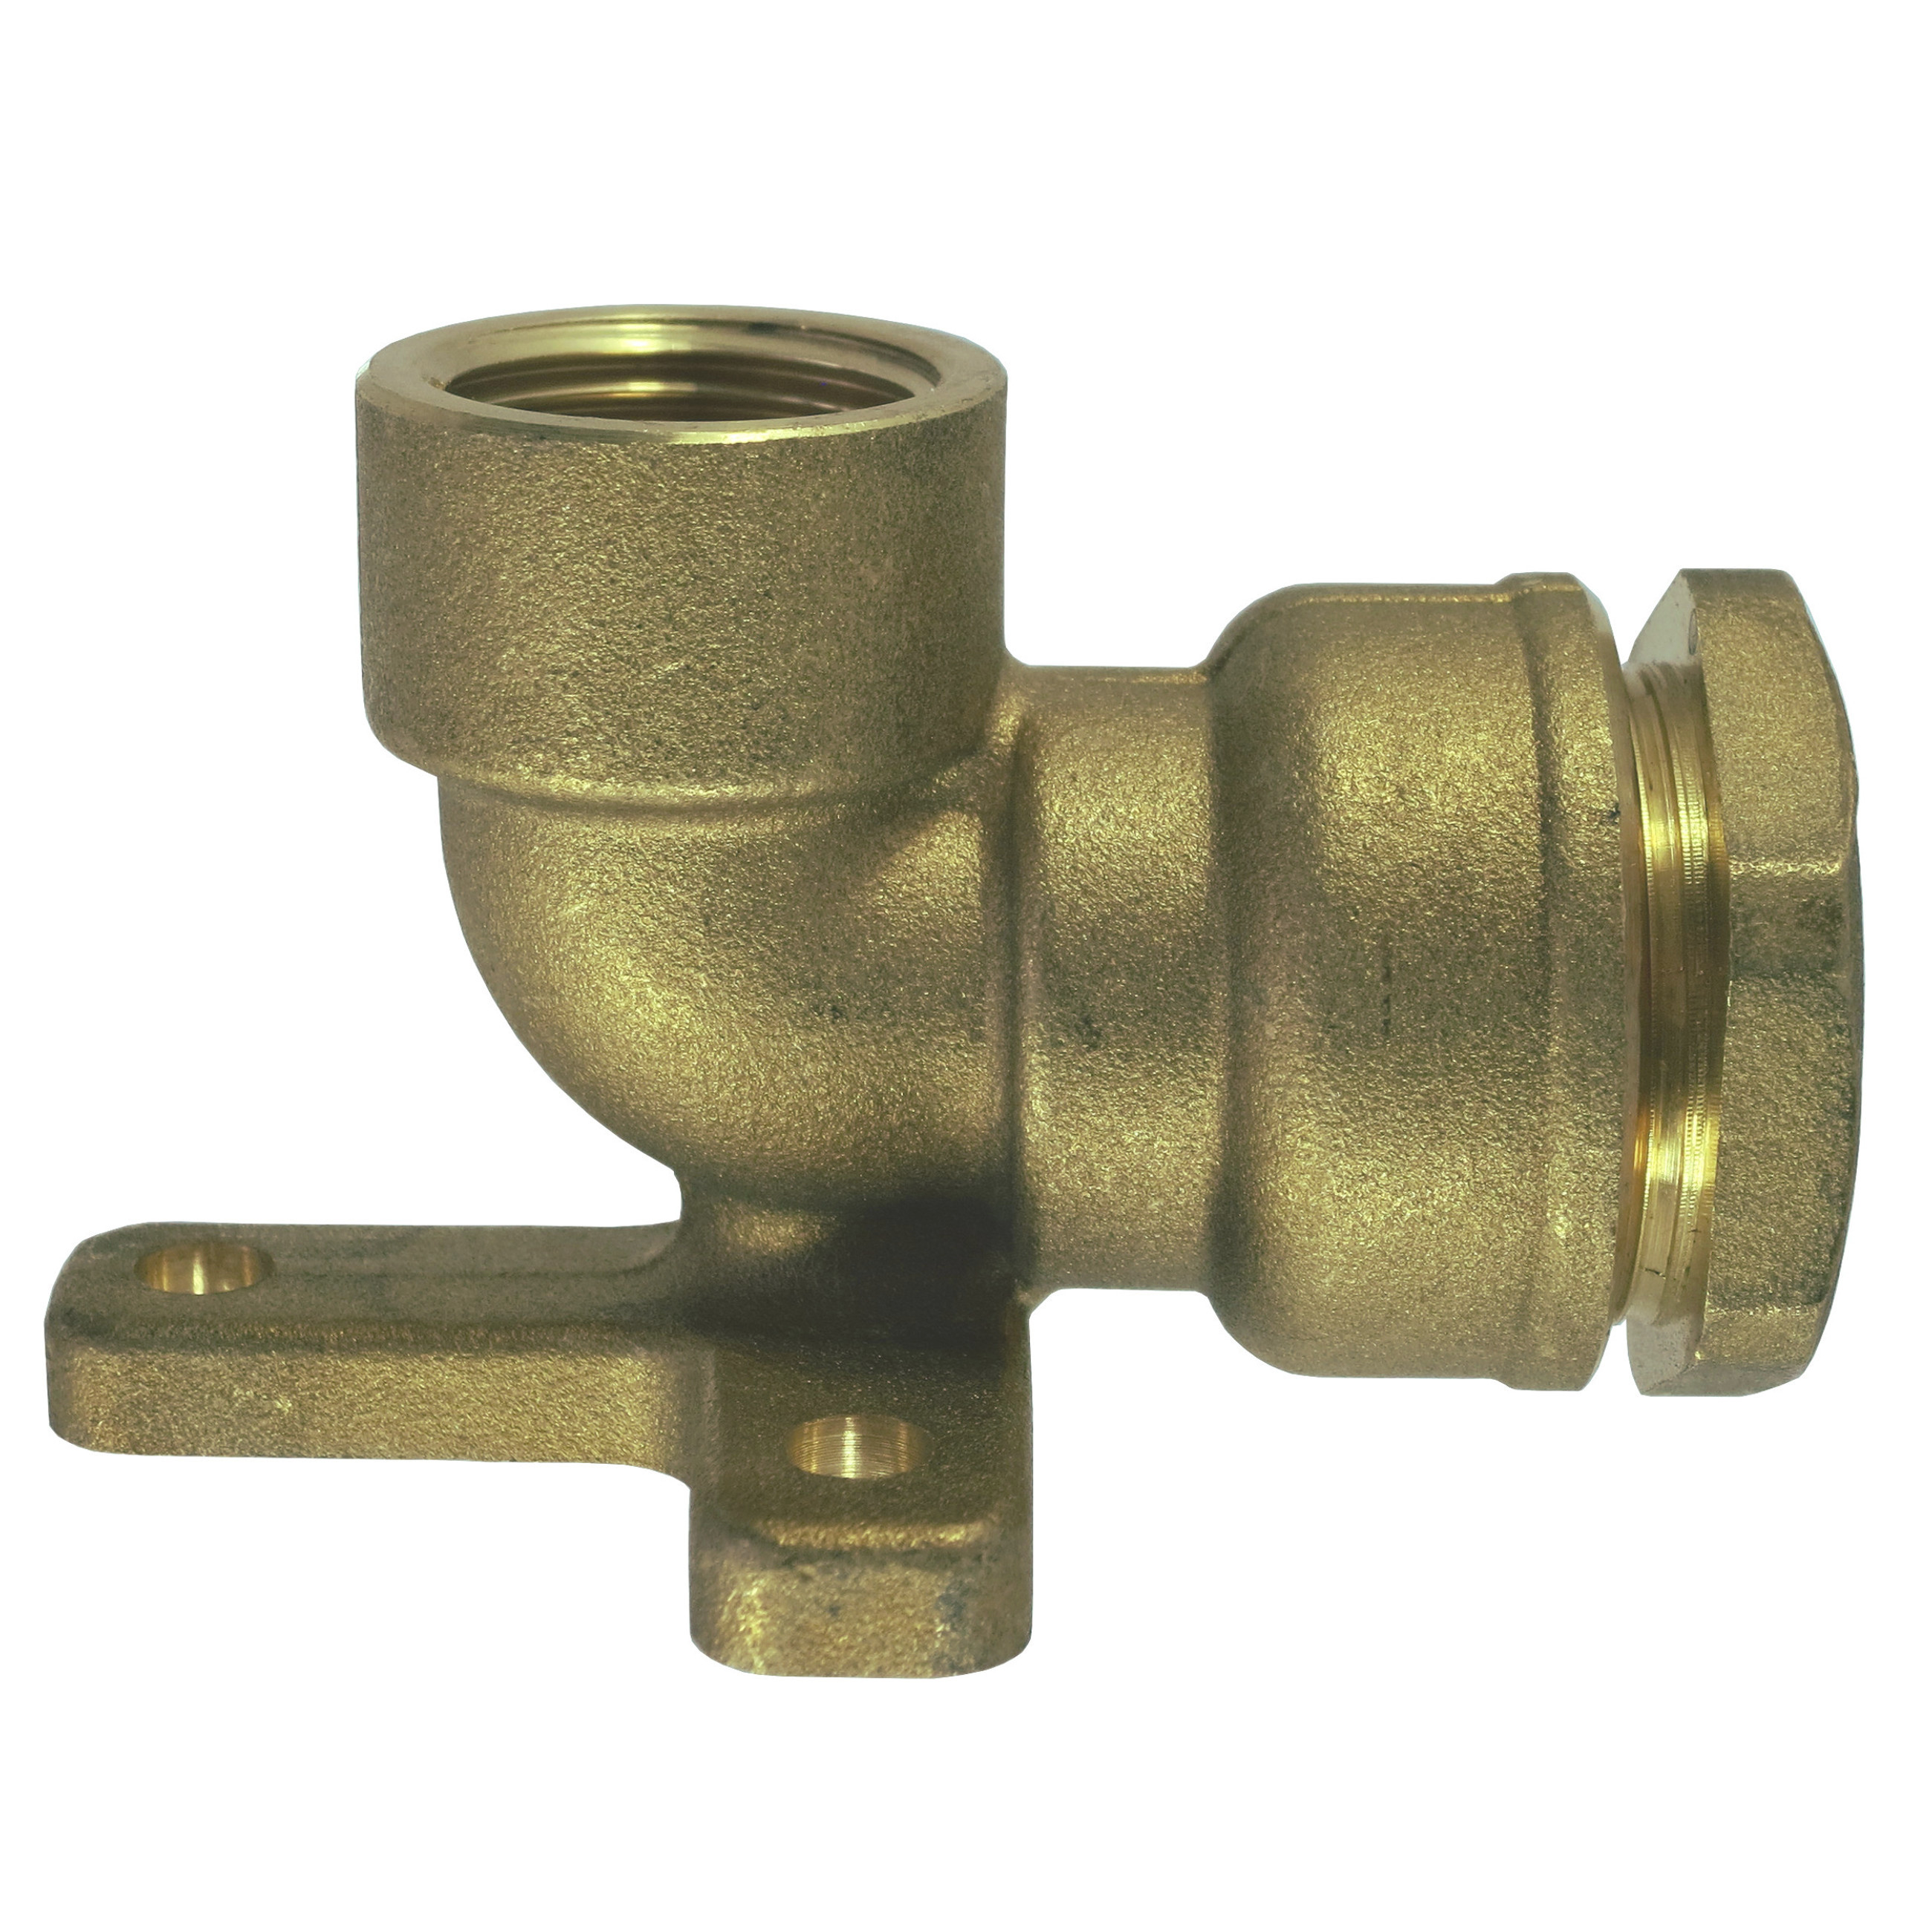 Plumbing N Parts 0.5 W x 0.625-in Brass Compression Union, Pack of 10  PNP-35511